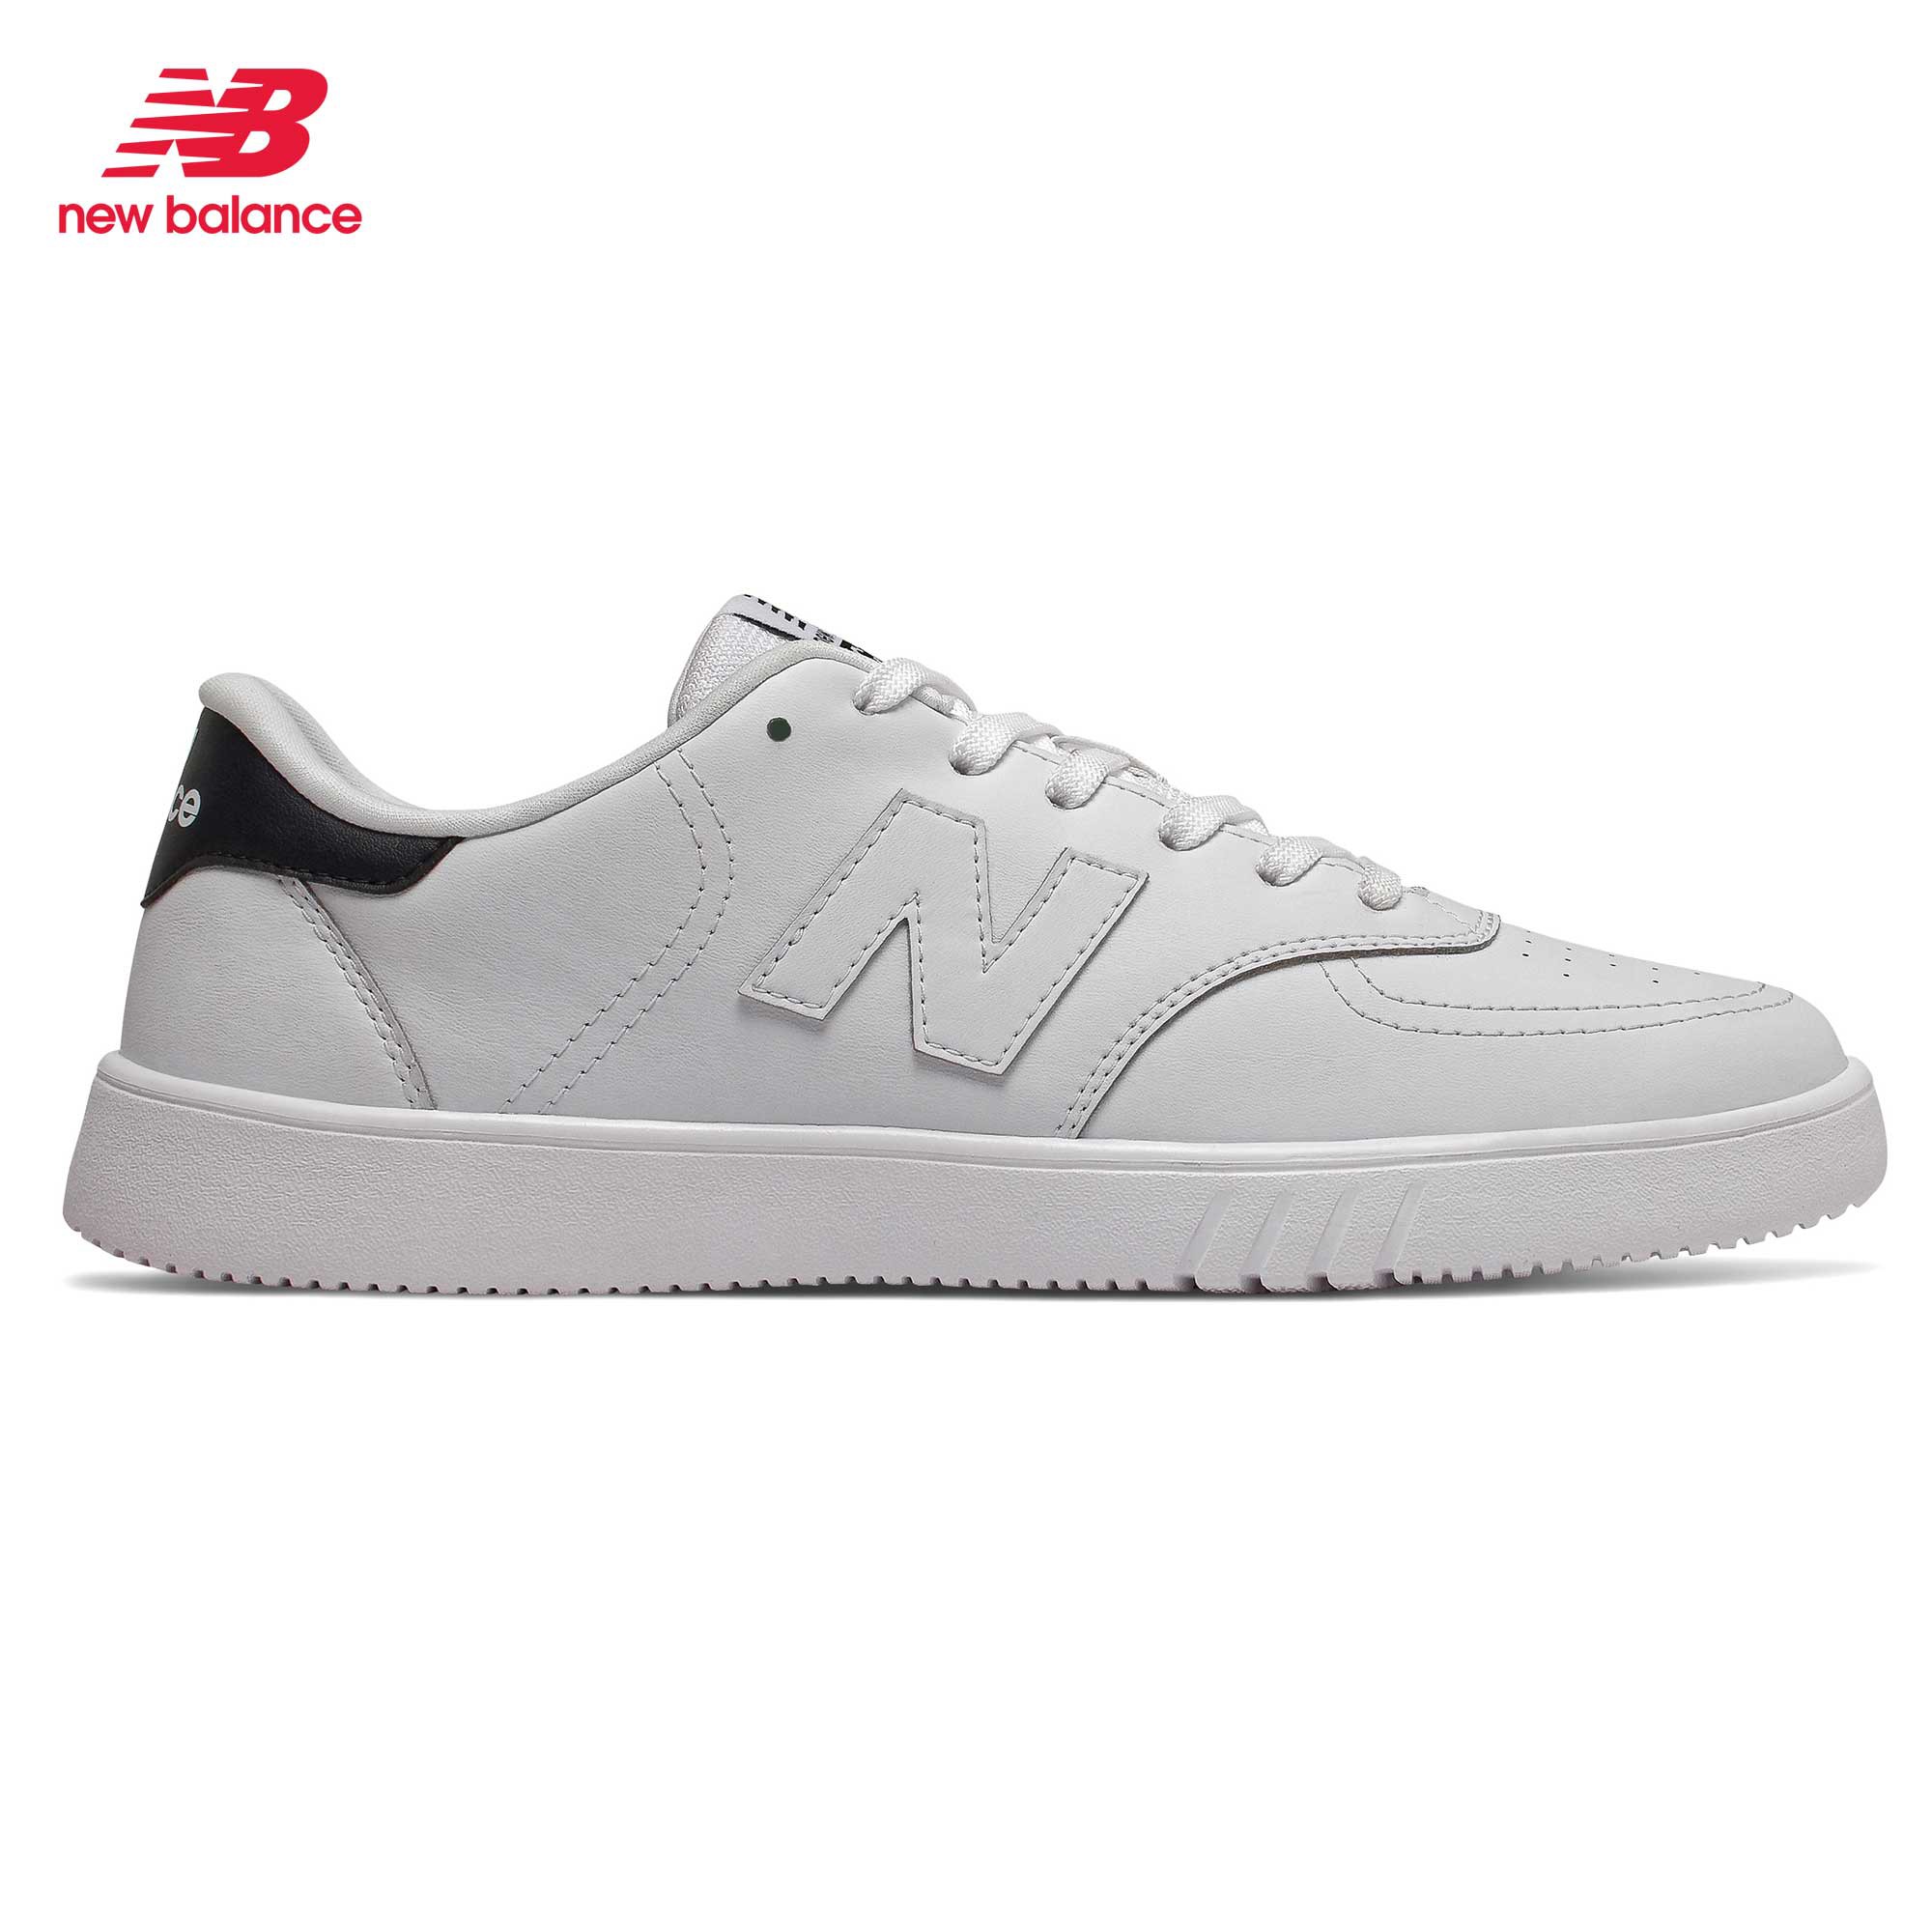 nb shoes white